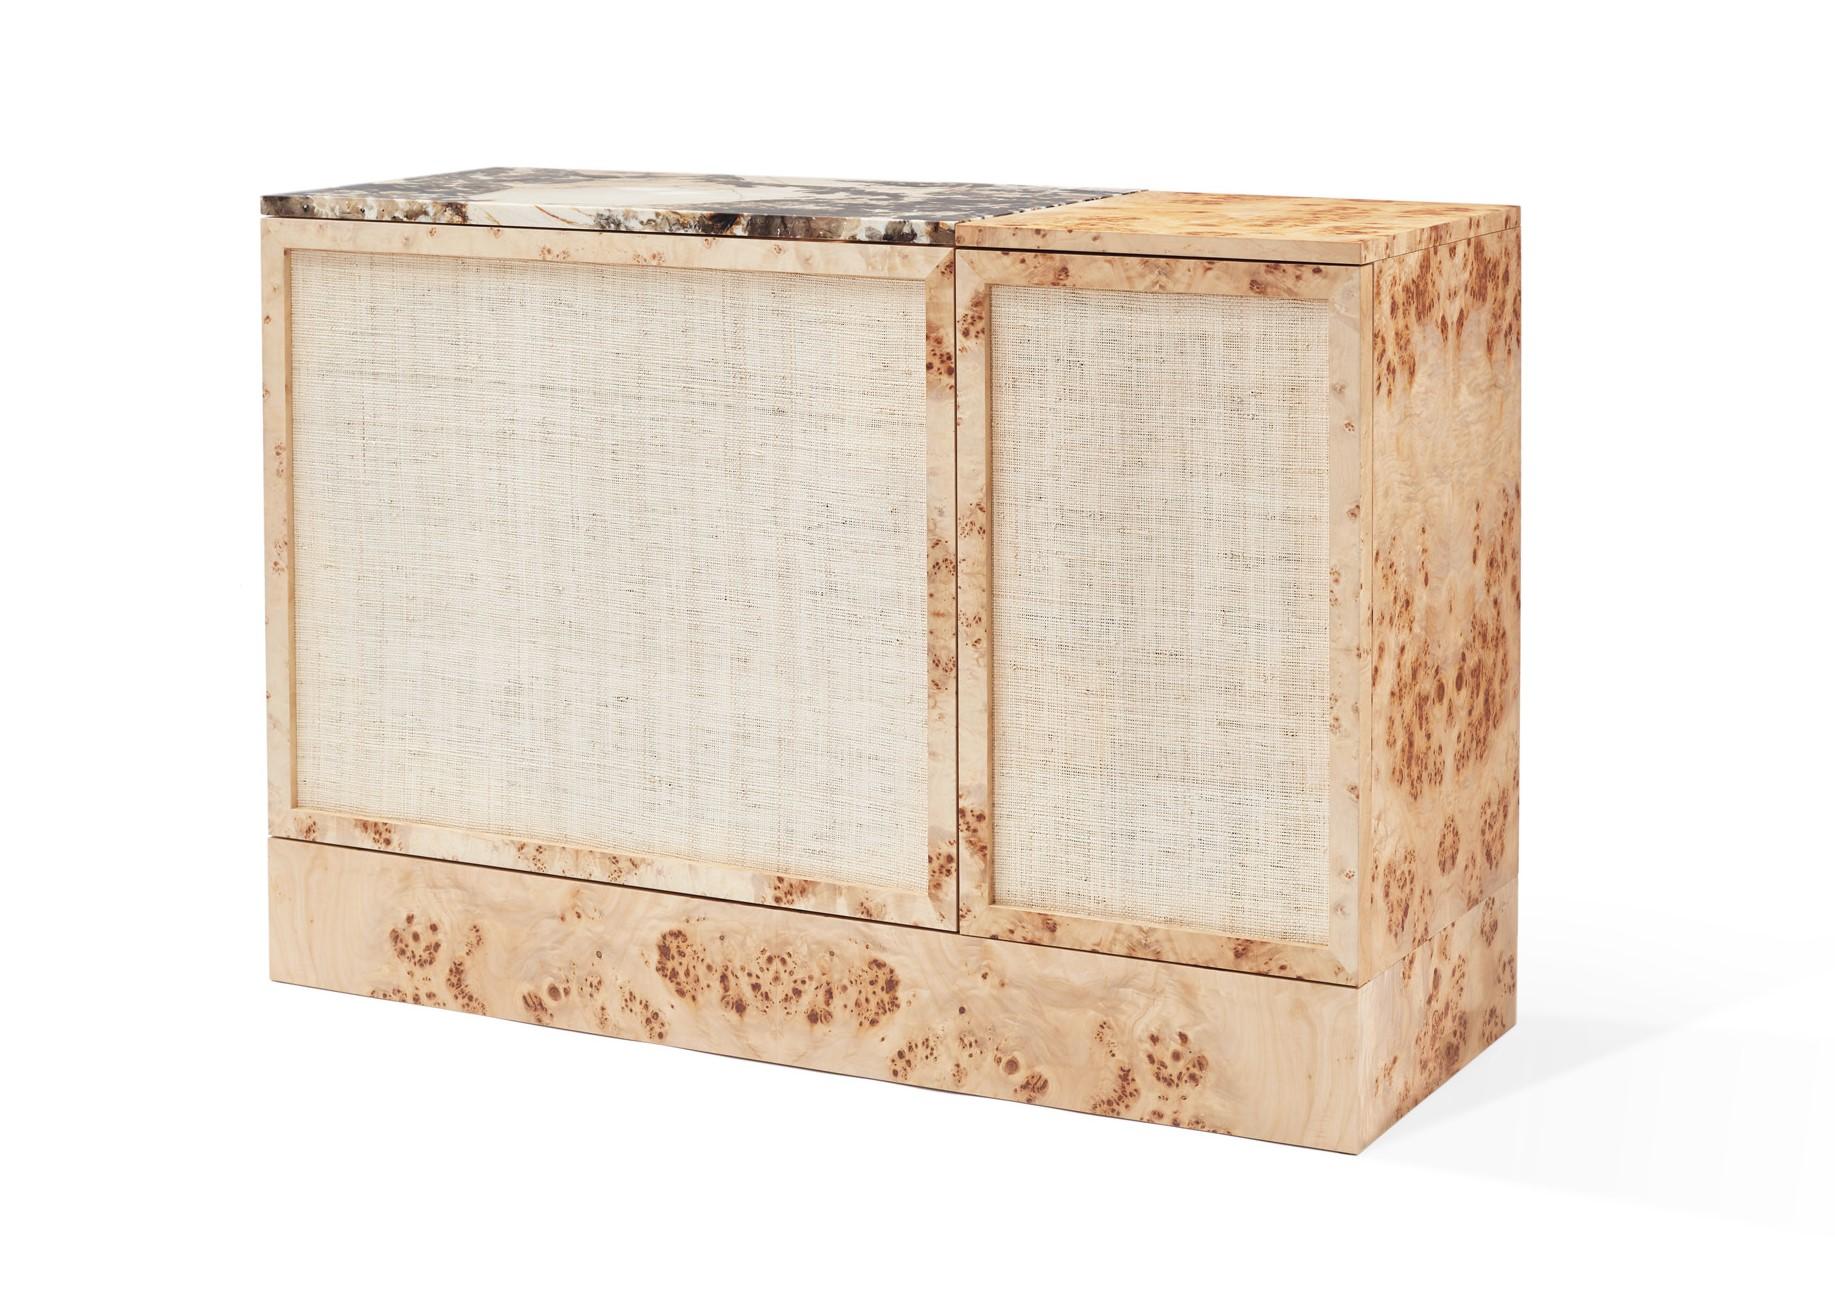 The monolithic lines of the piece contrast with the delicacy and elegance of its materials. The poplar root wood combined with the natural rattan confer the piece a natural character in a clear compliment to its origins, whilst the exotic stone top